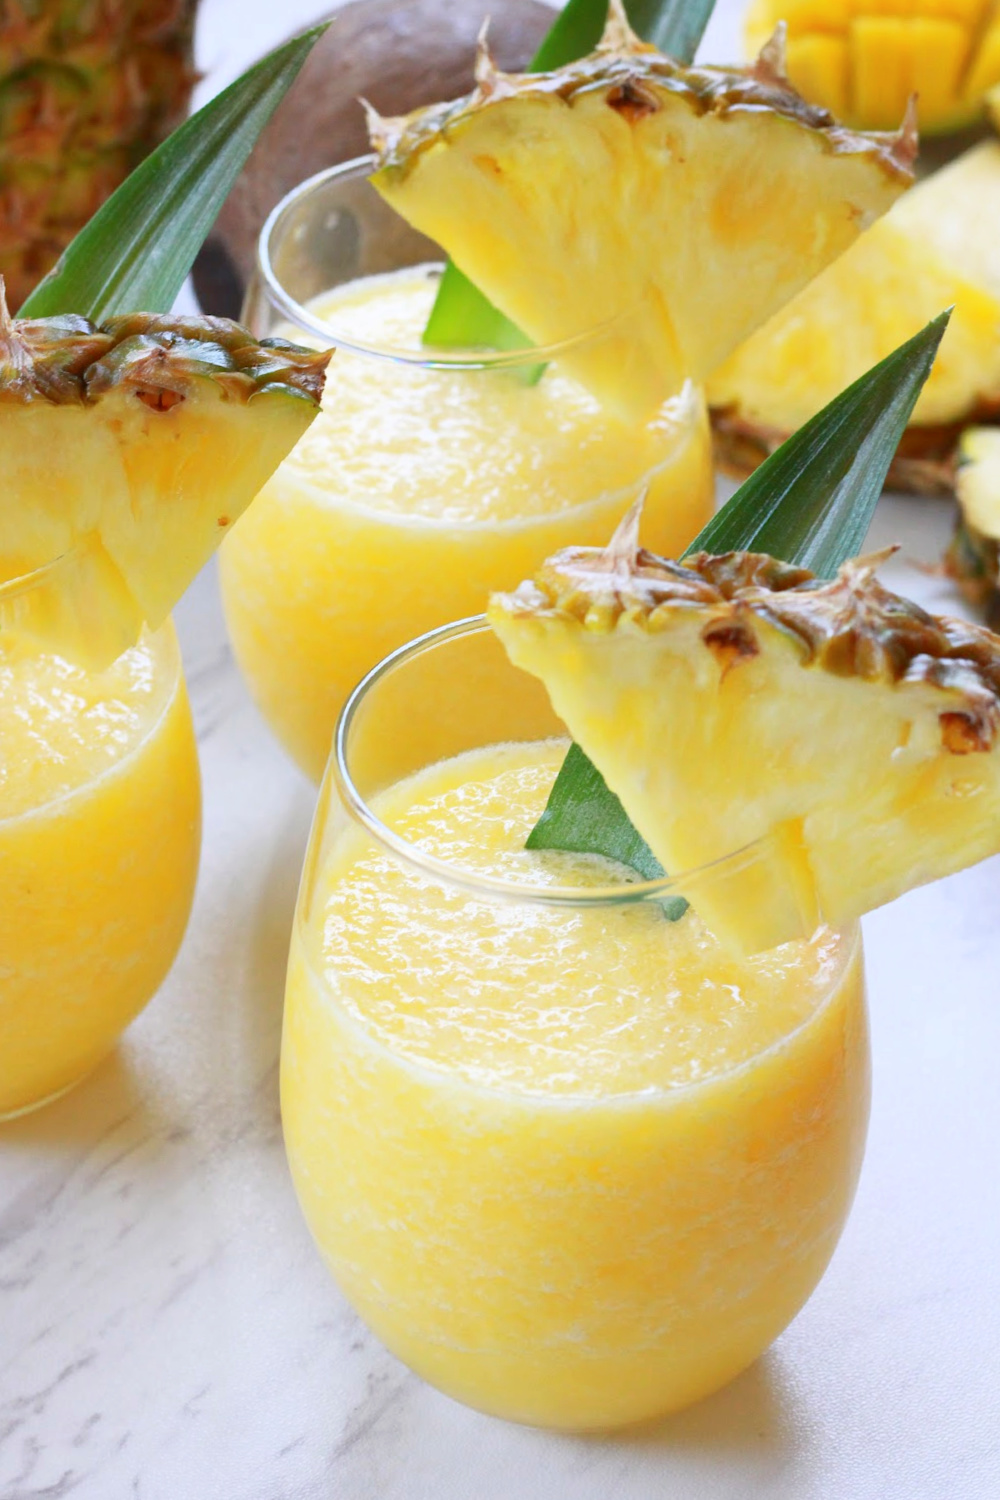 These Tropical Wine Slushies are refreshing and delicious making them the perfect summer cocktail recipe!  